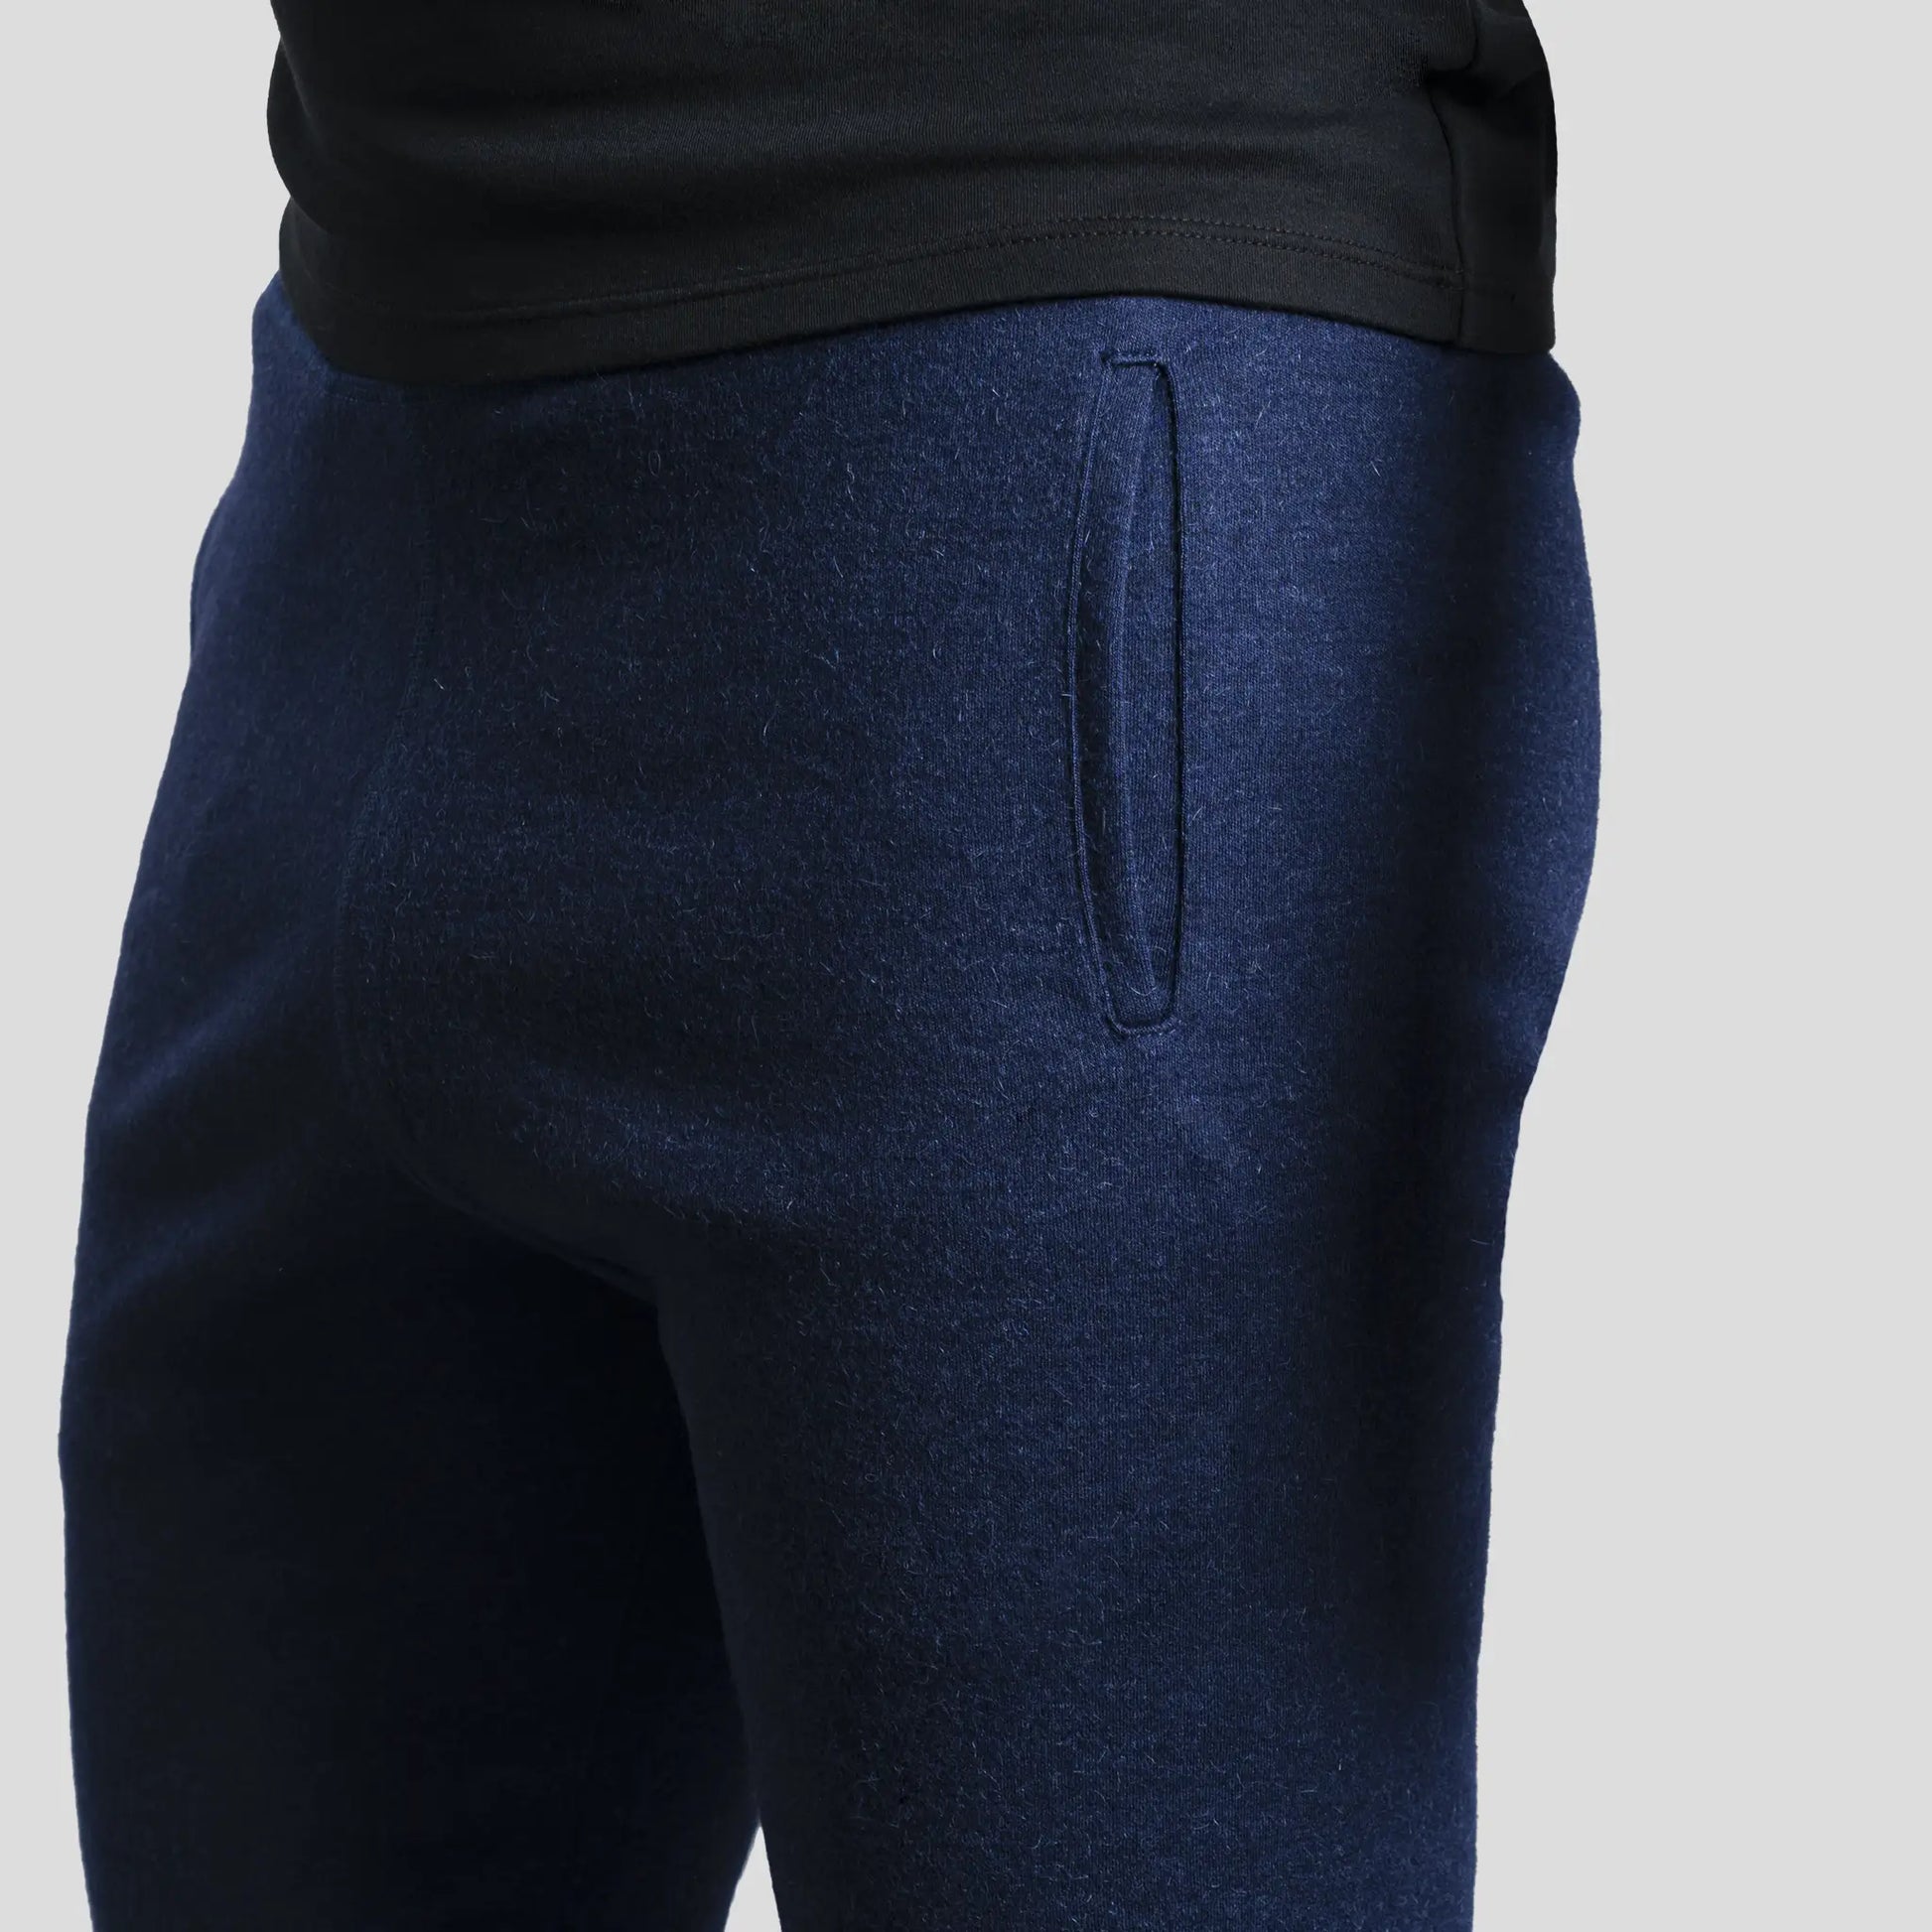 mens eco friendly sweatpants midweight color navy blue